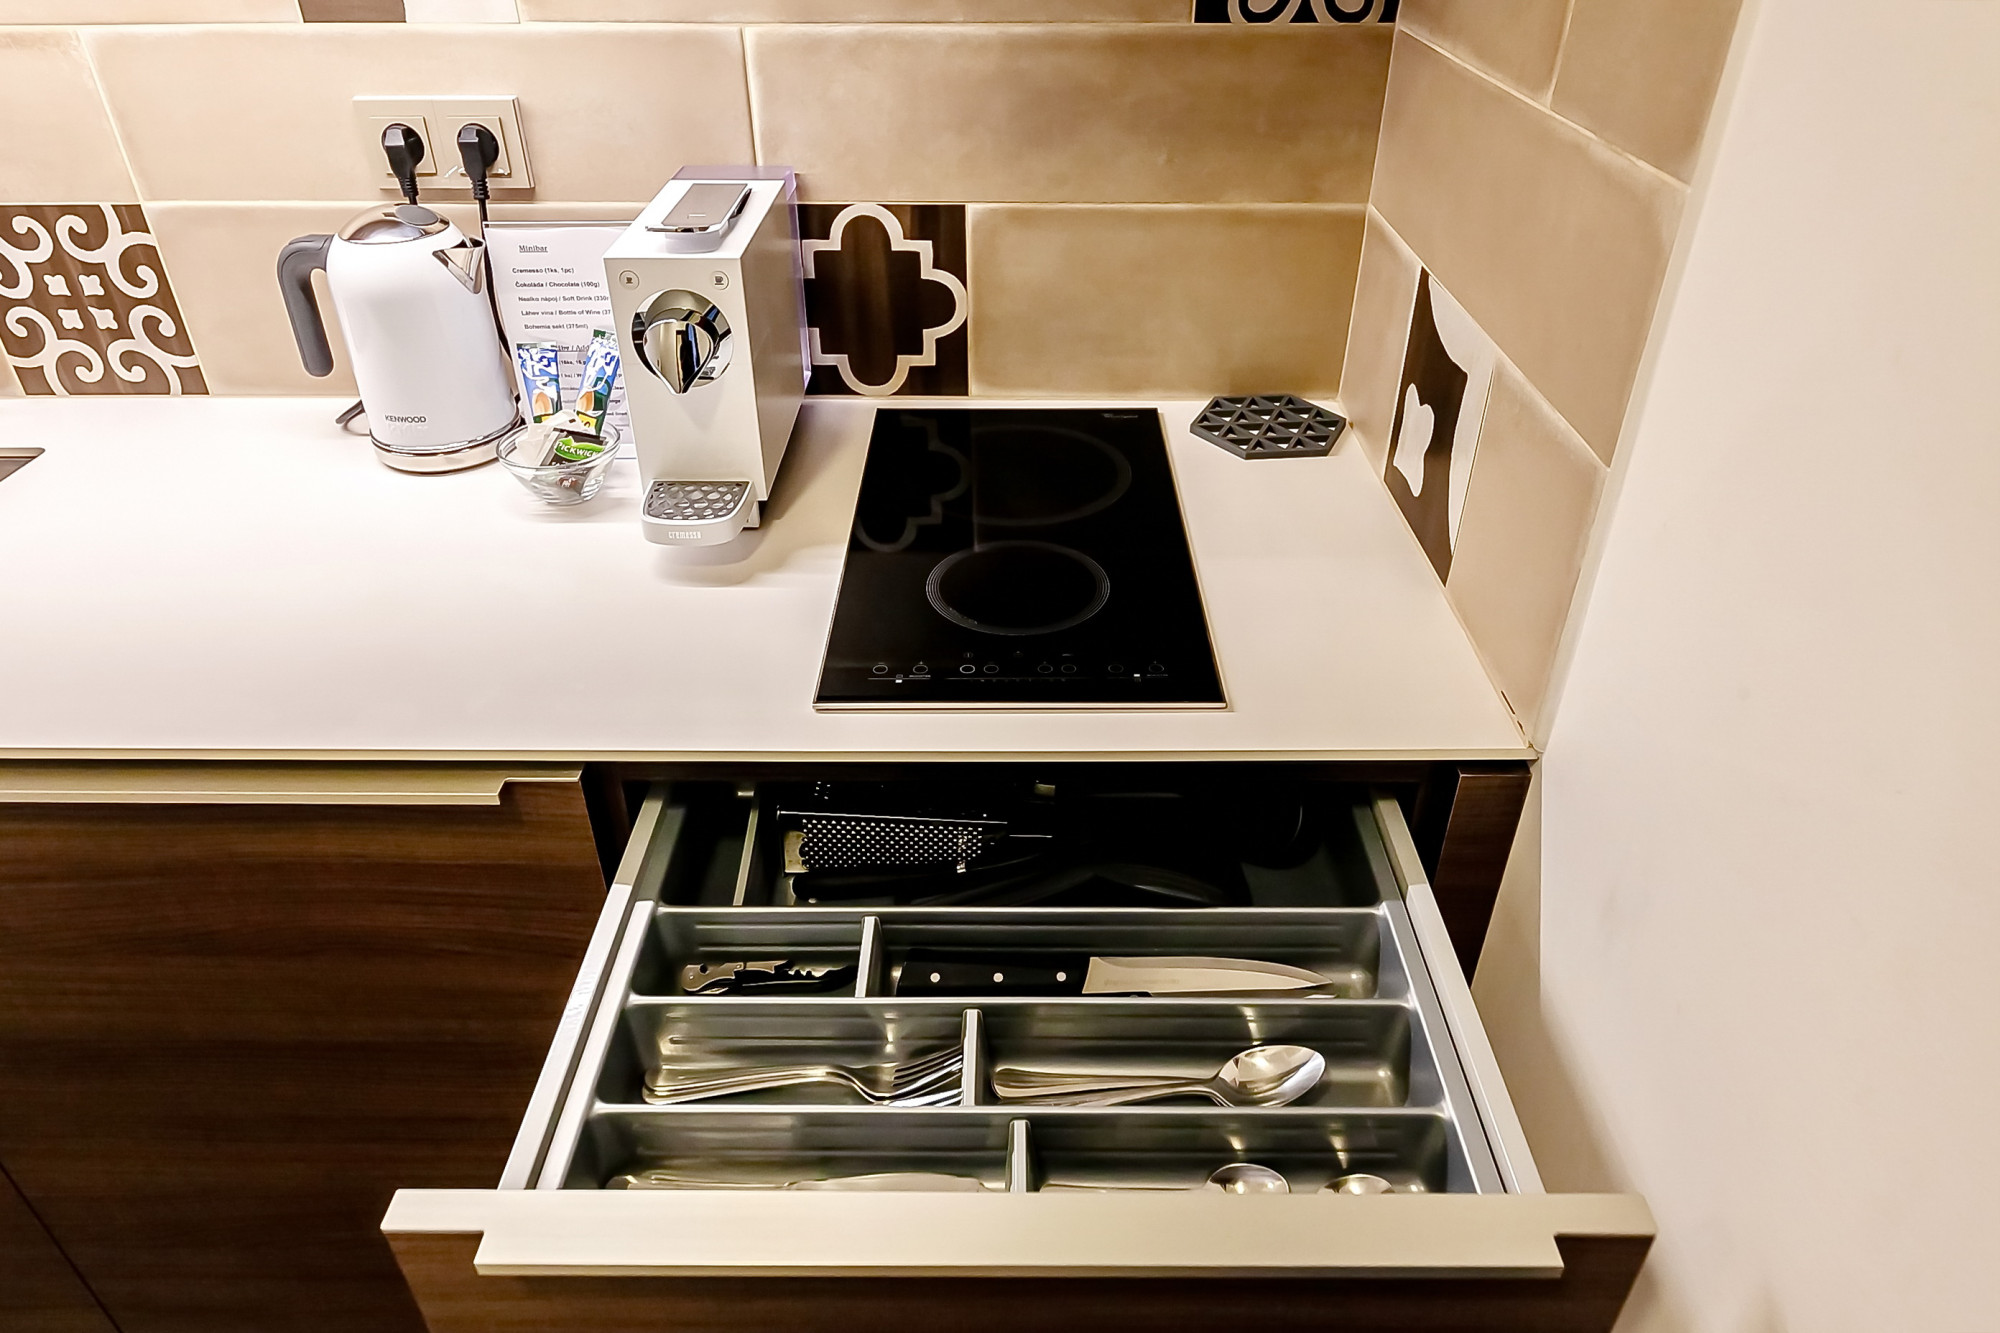 Fully equipped kitchen with sink, microwave, and toaster at Aparthotel Vinohradský dům Prague Studio Attic.